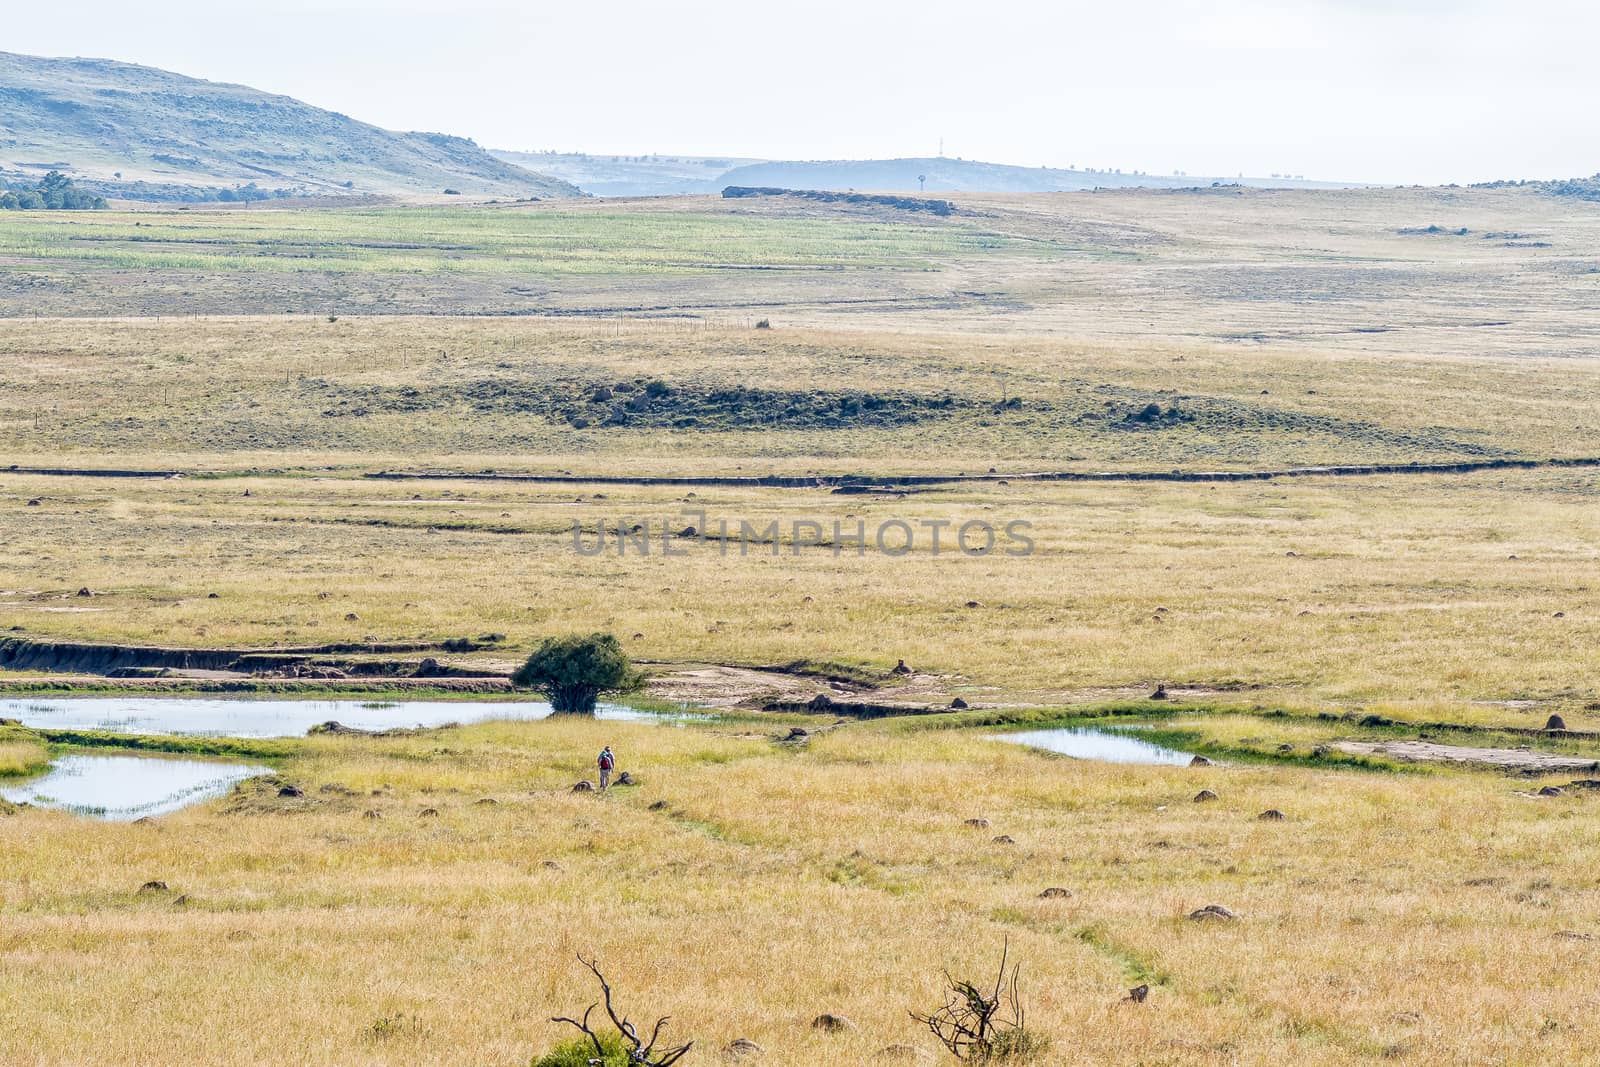 Hikers on the Eland Hiking Trail at Einged by dpreezg